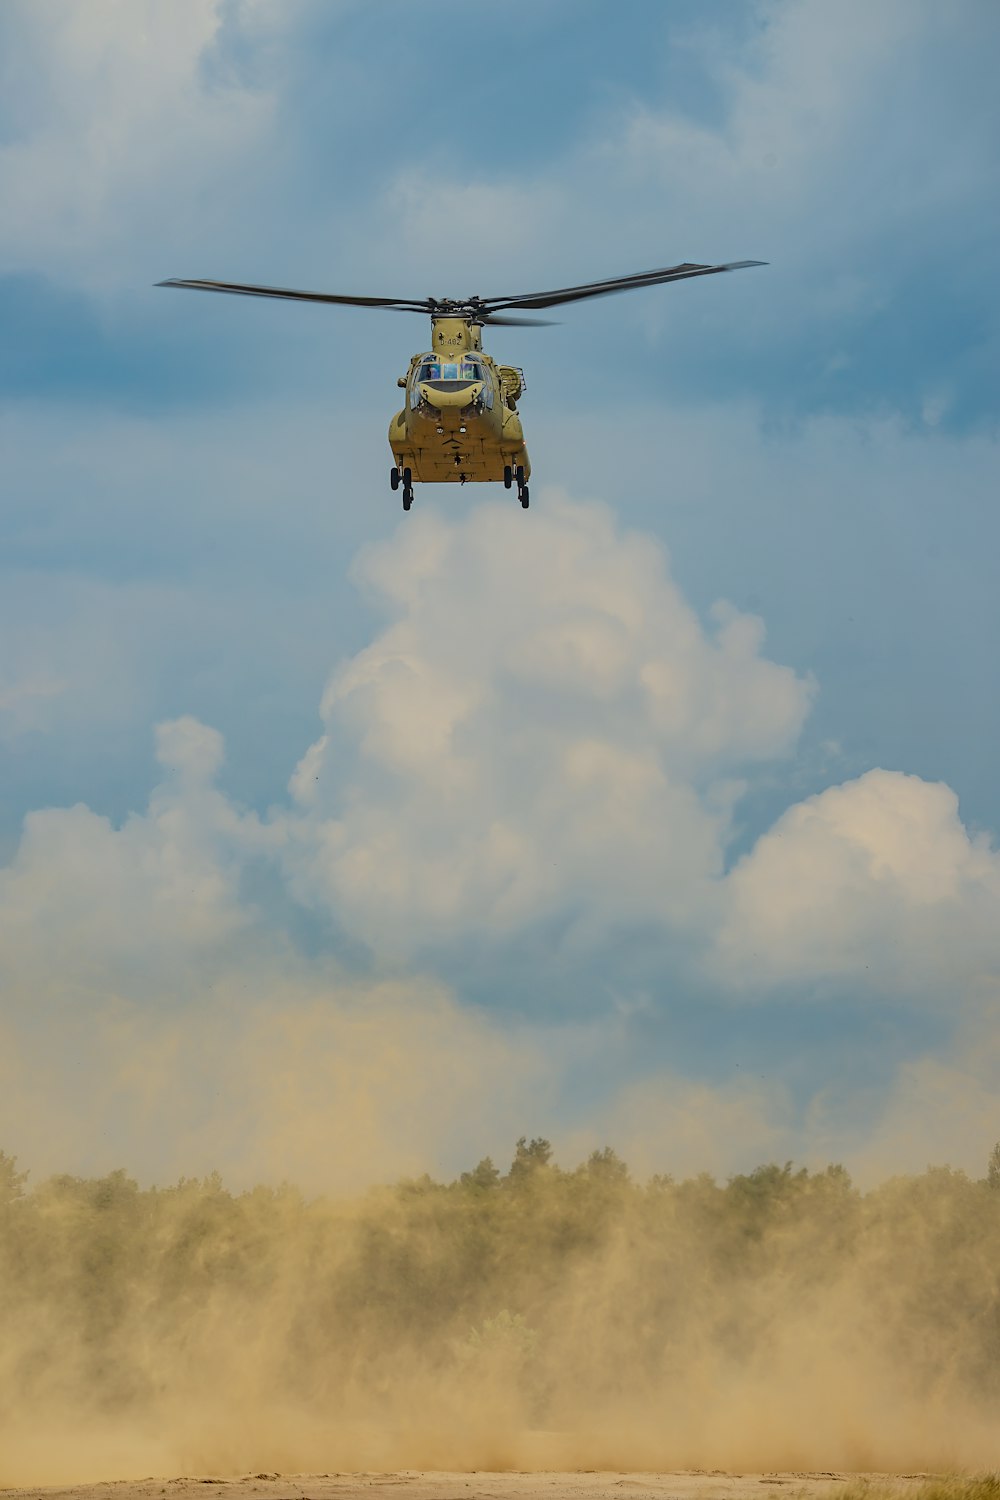 a helicopter flying over a dirt field under a cloudy blue sky